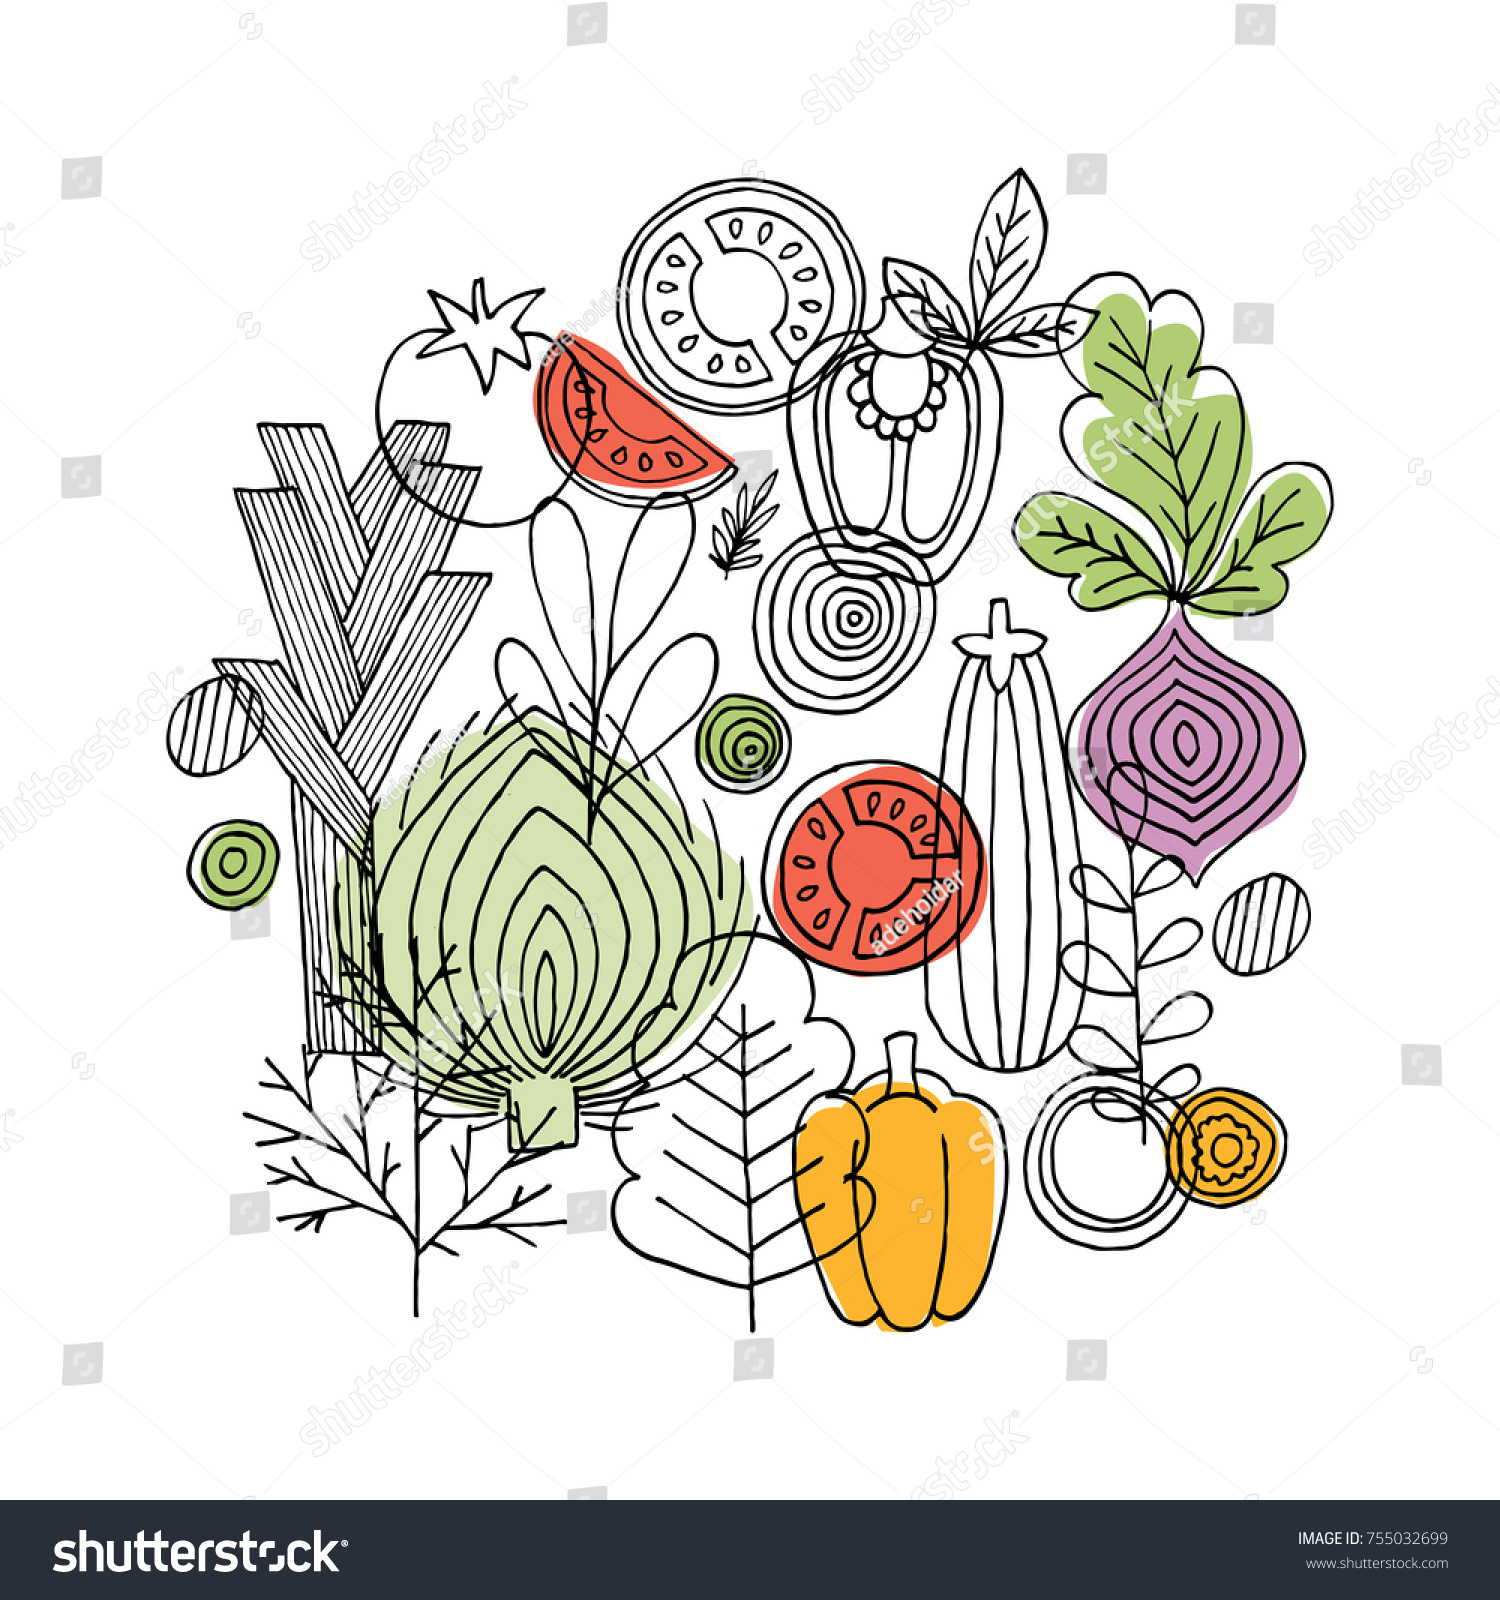 Vegetables round composition. Linear graphic. Vegetables background. Scandinavian style. Healthy food. Vector illustration #755032699